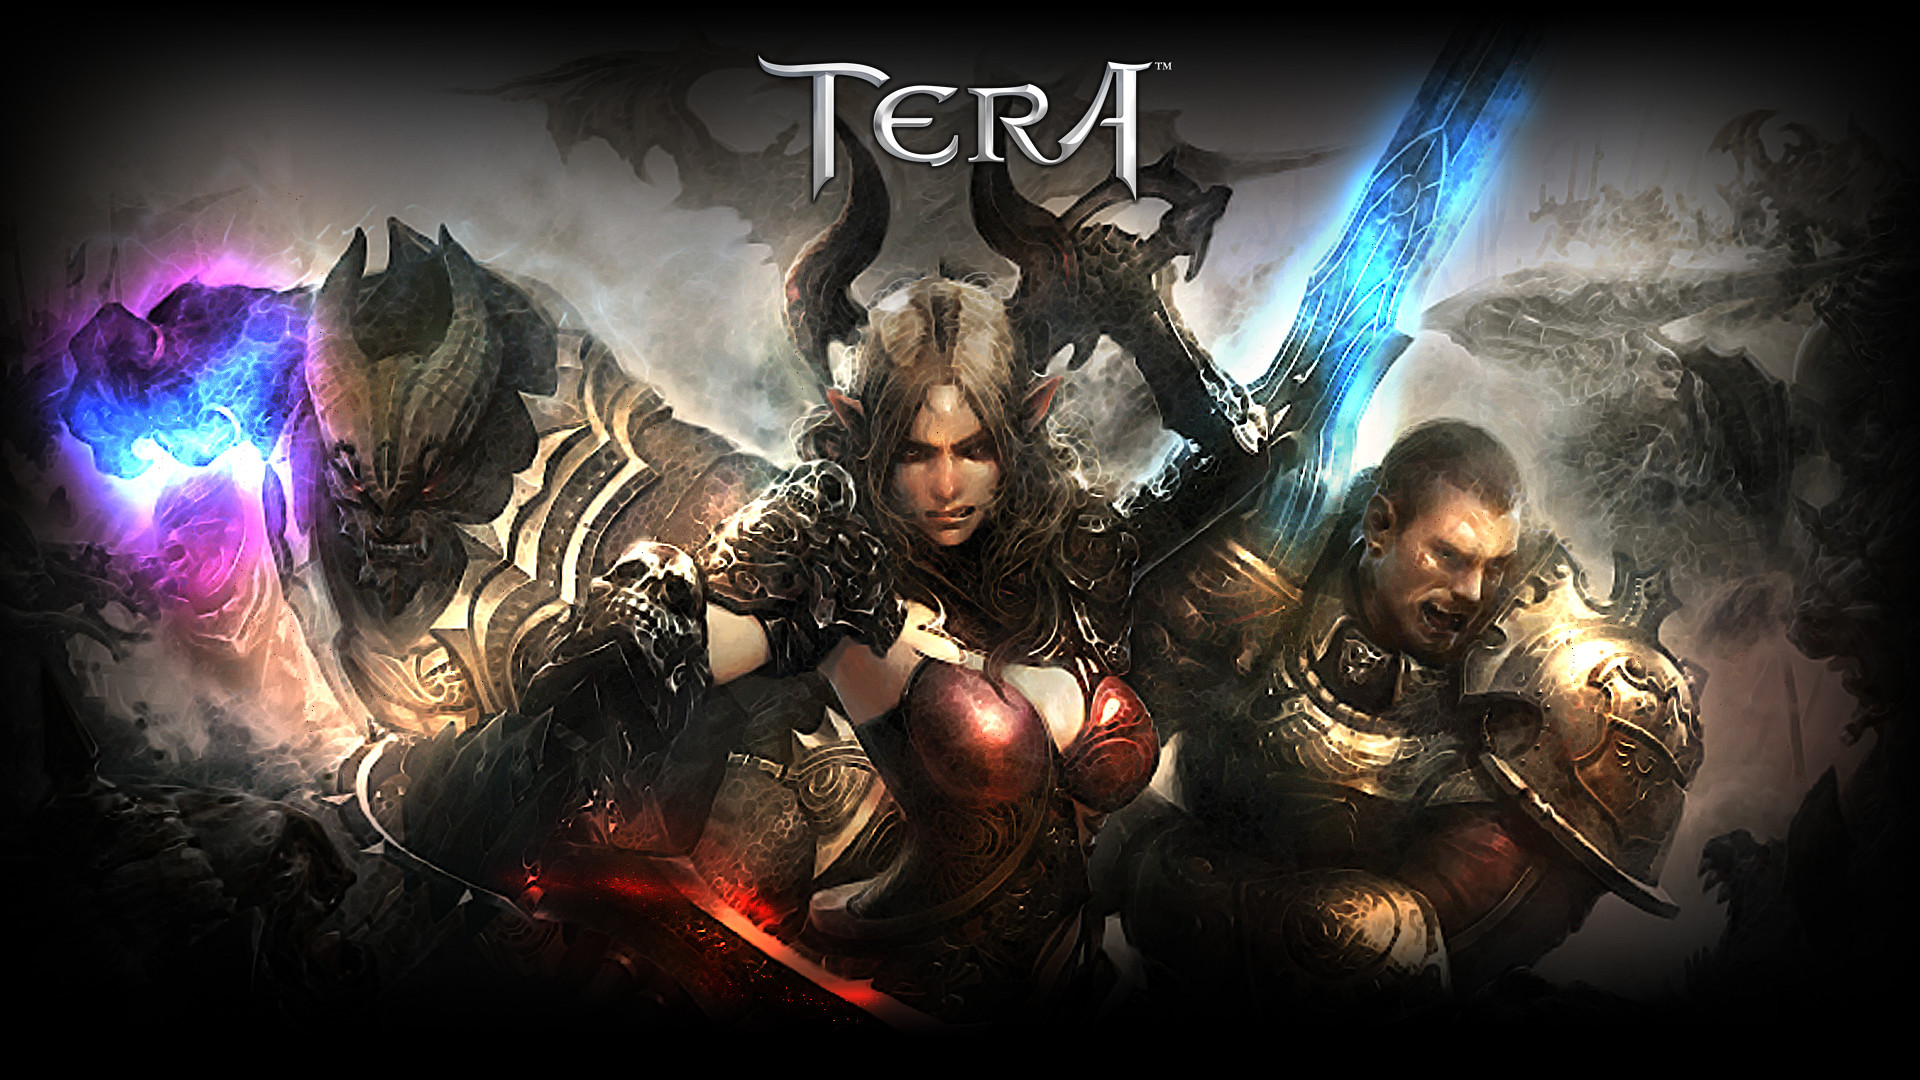 1920x1080 Tera Wallpaper Remix by Tequilaforce - HD Wallpapers